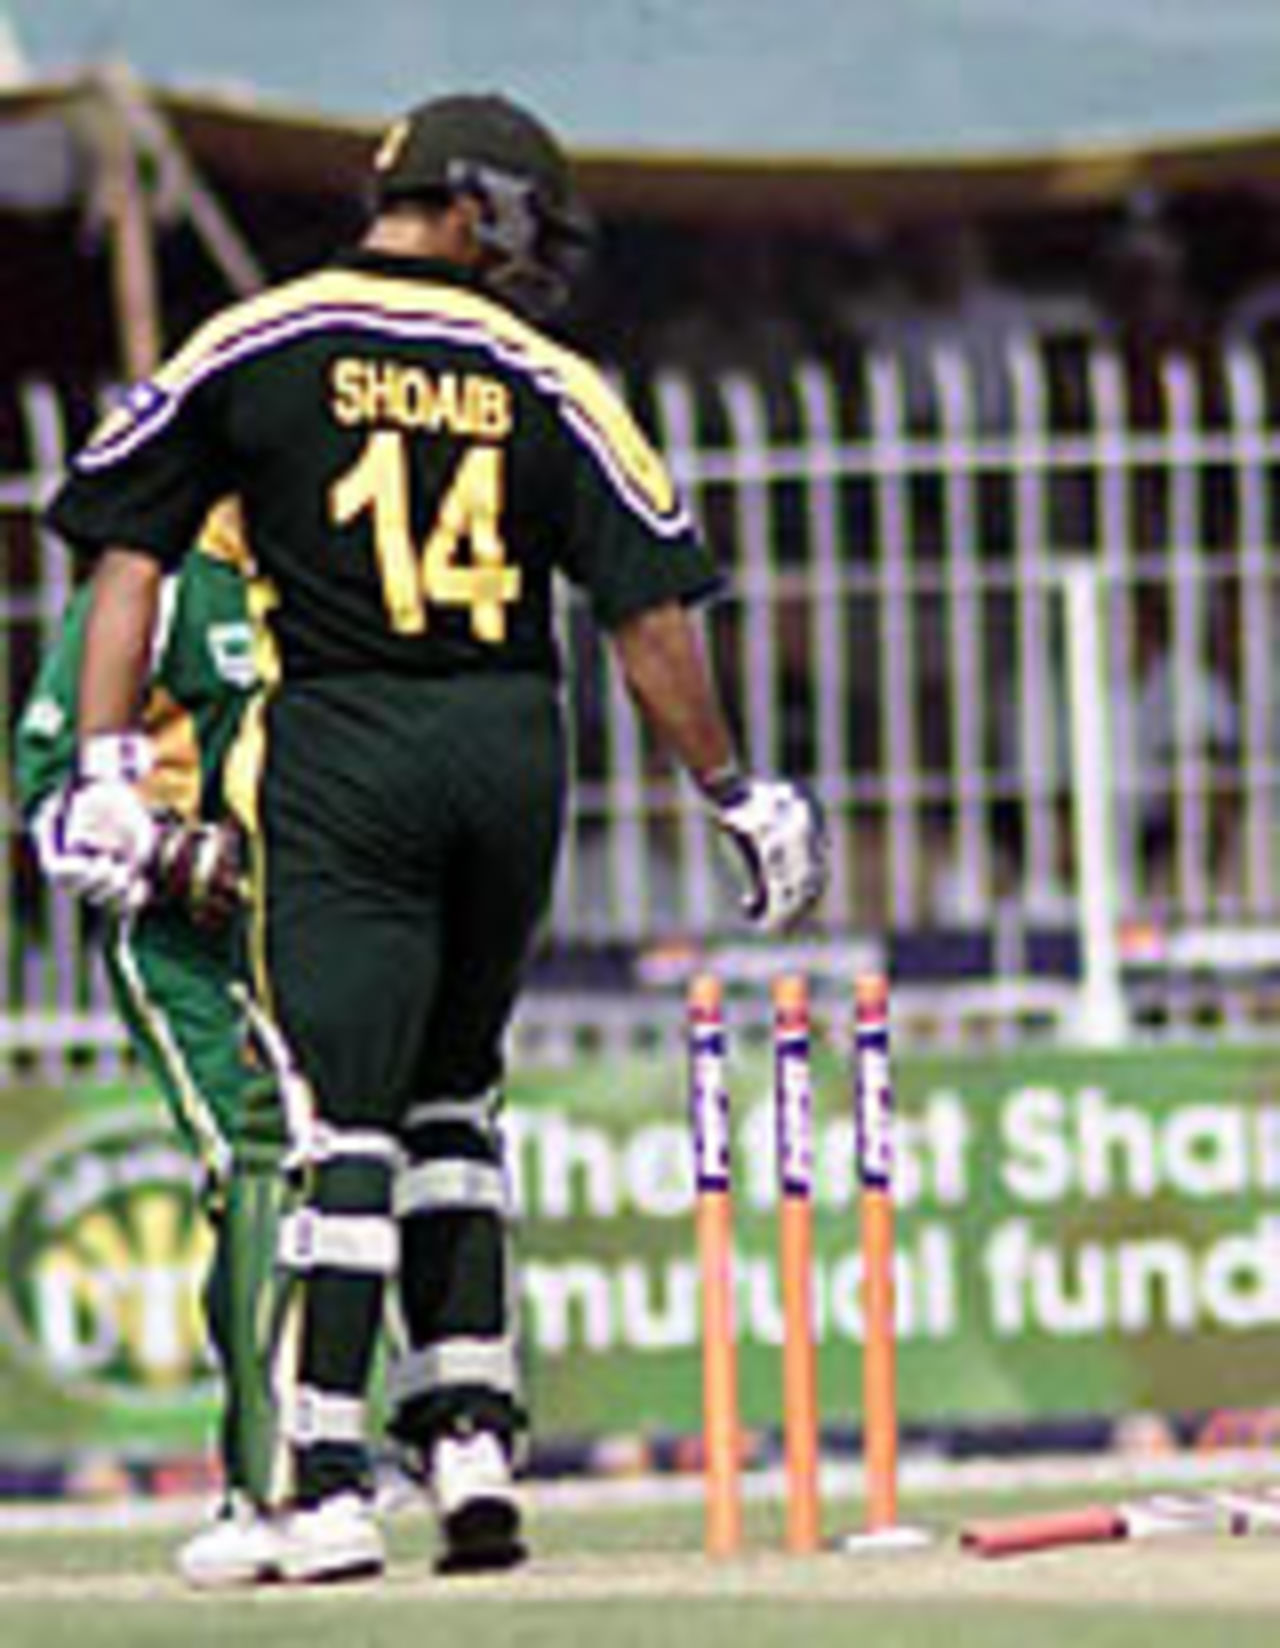 Shoaib Akhtar on the receiving end for once, Pakistan v South Africa, 3rd ODI, Faisalabad, October 7, 2003.